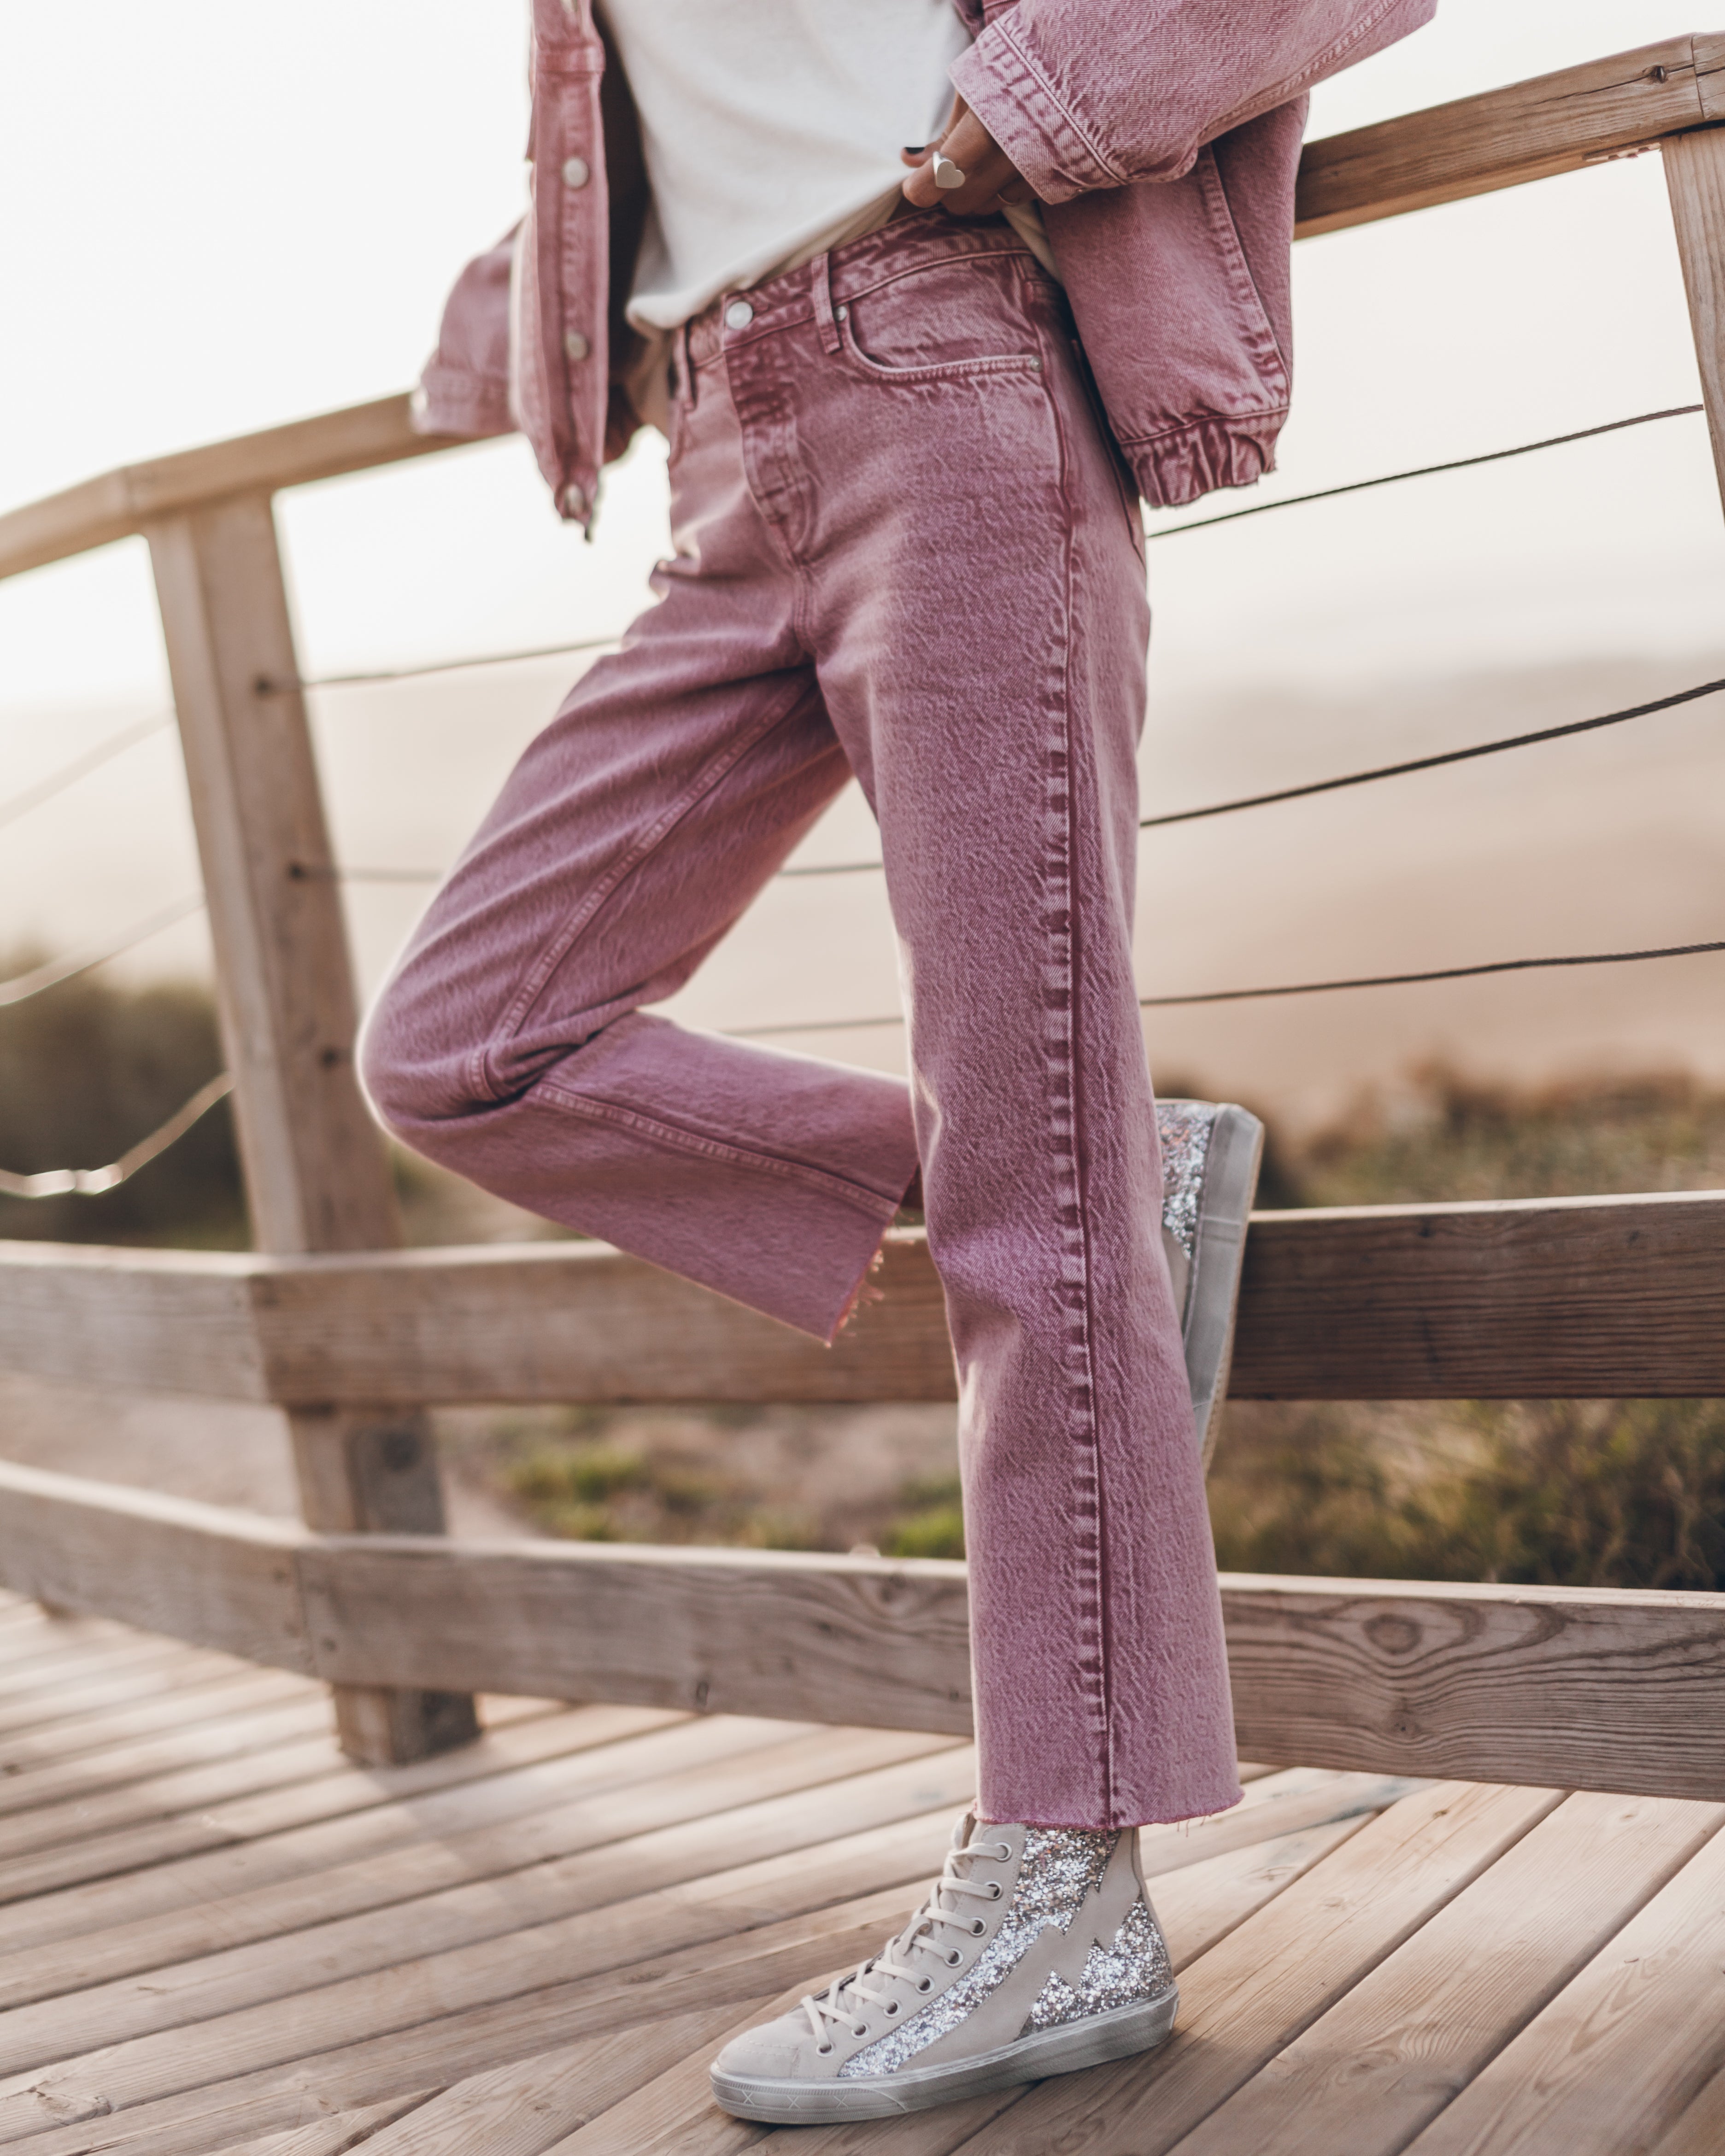 The Pink Faded Cropped Straight Jeans